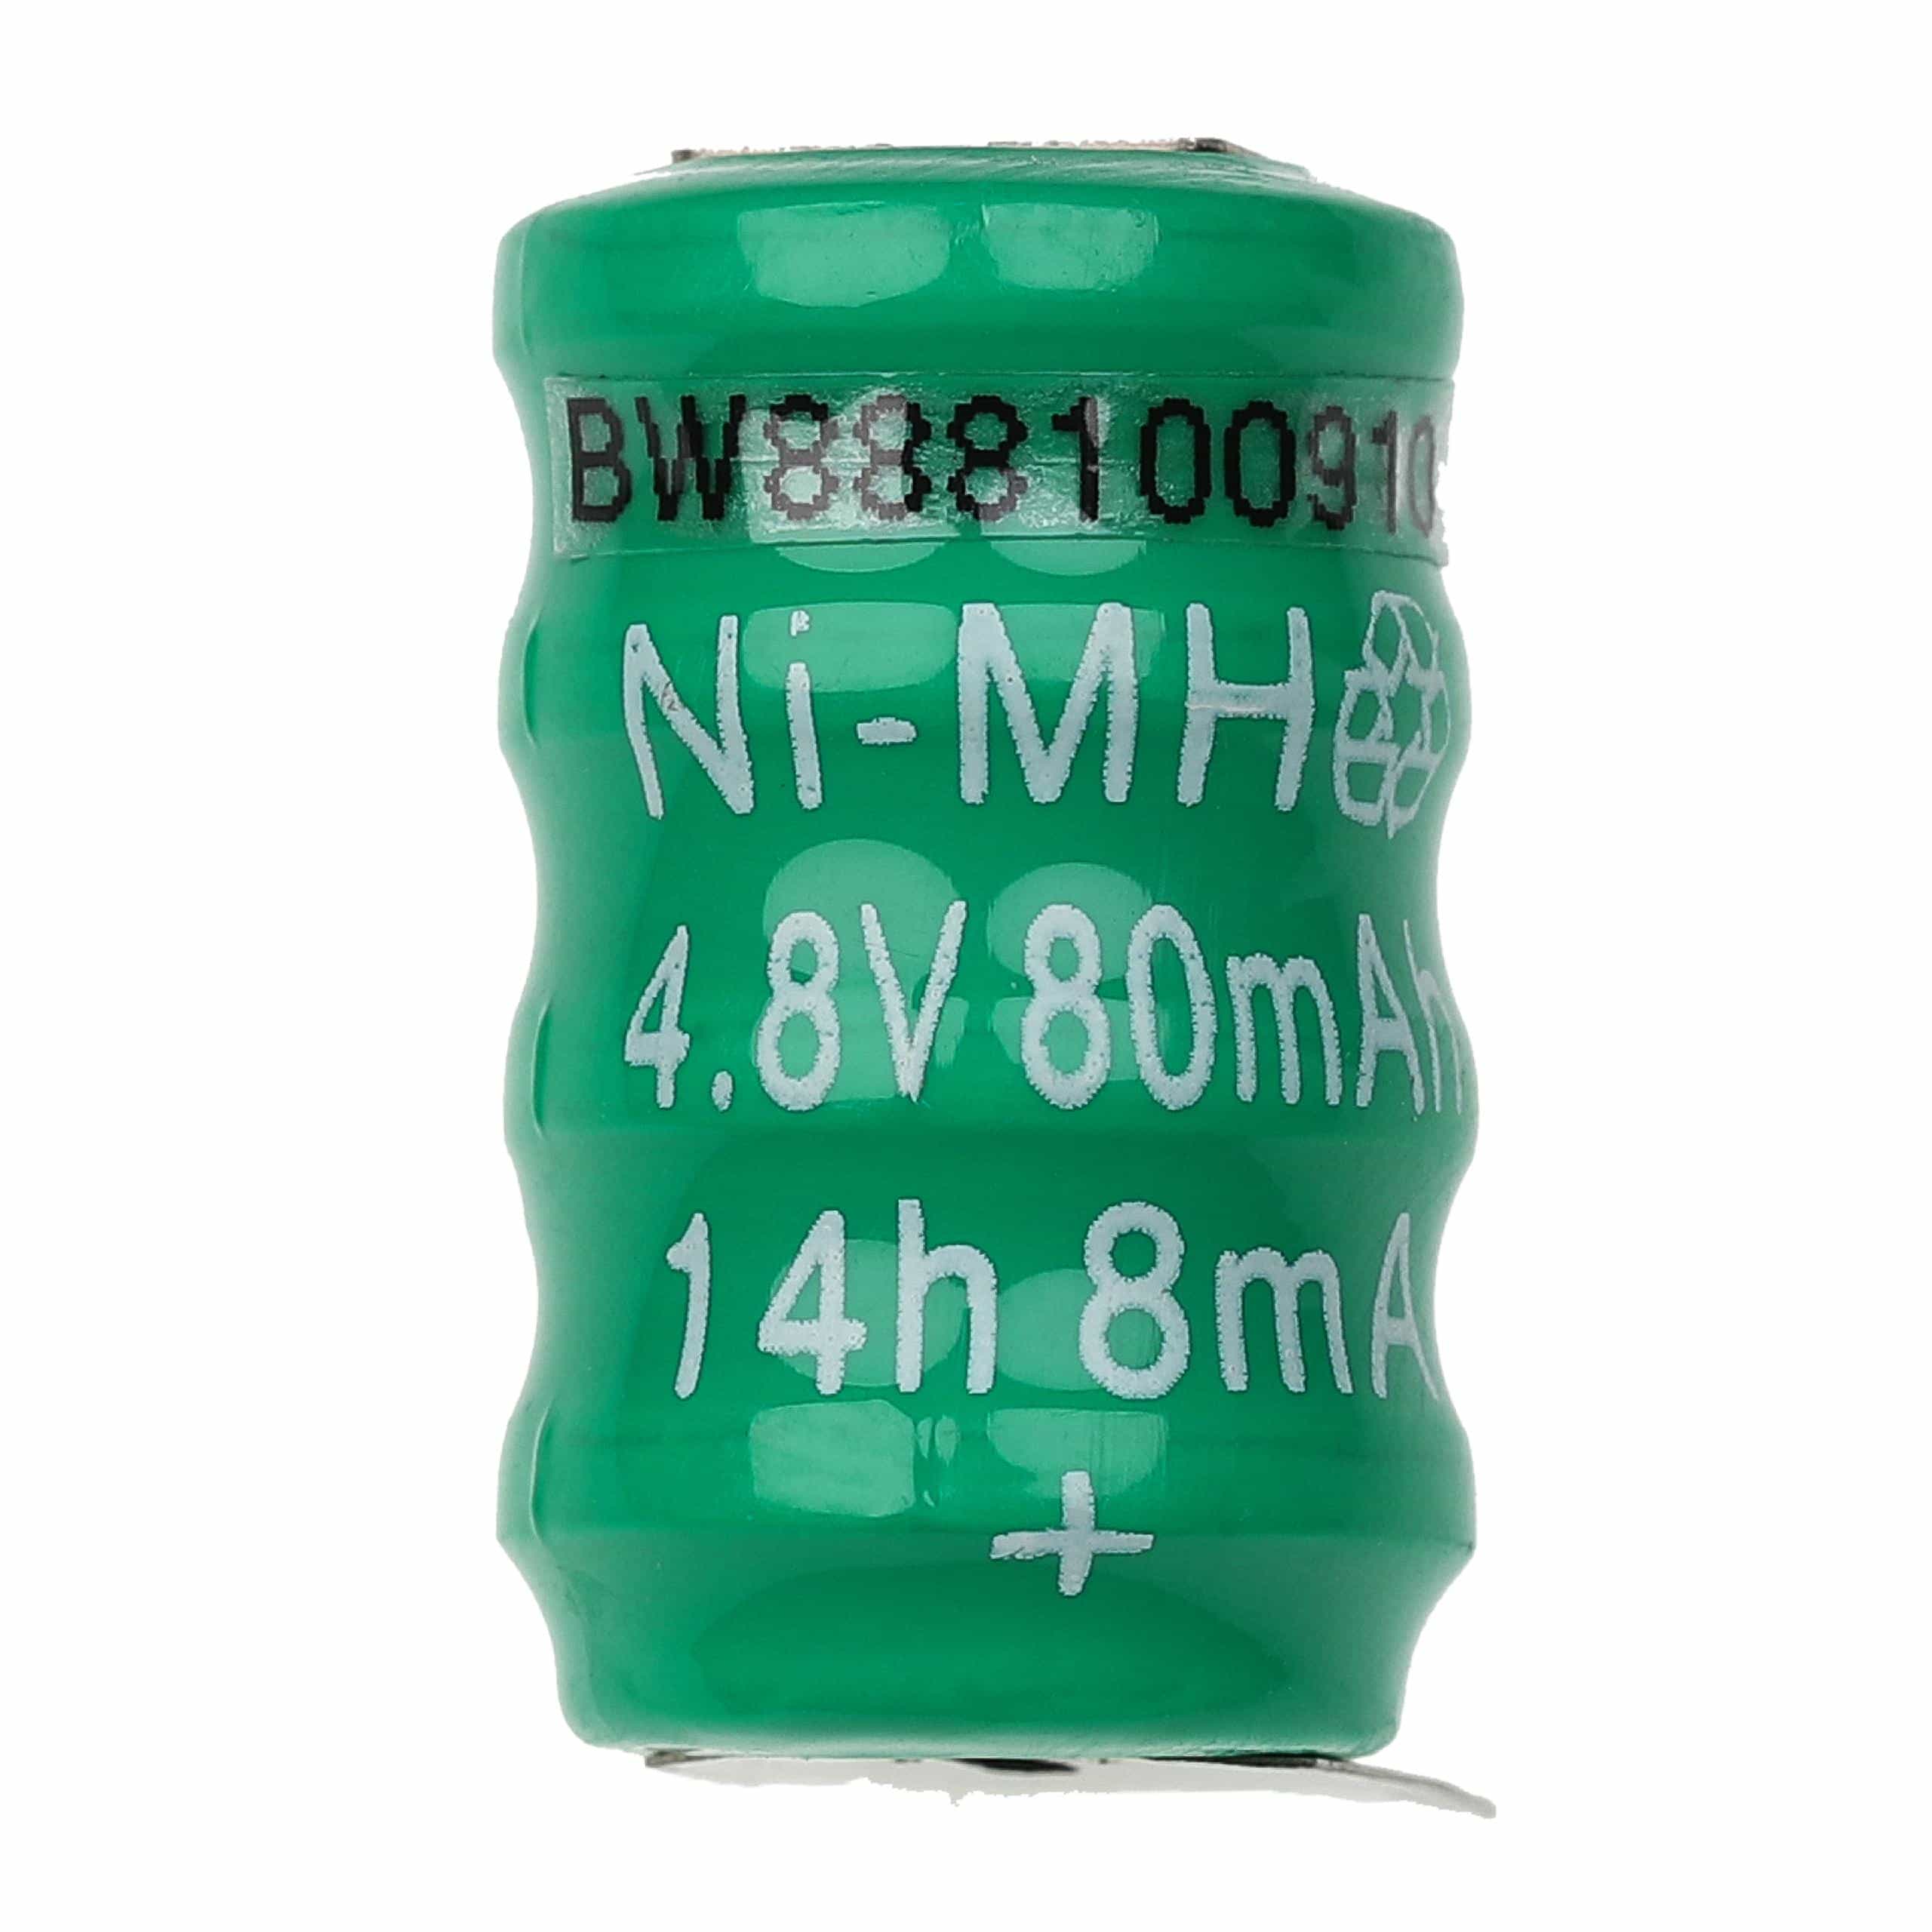 Button Cell Battery (4x Cell) Type V80H 3 Pins for Model Building Solar Lamps etc. - 80mAh 4.8V NiMH